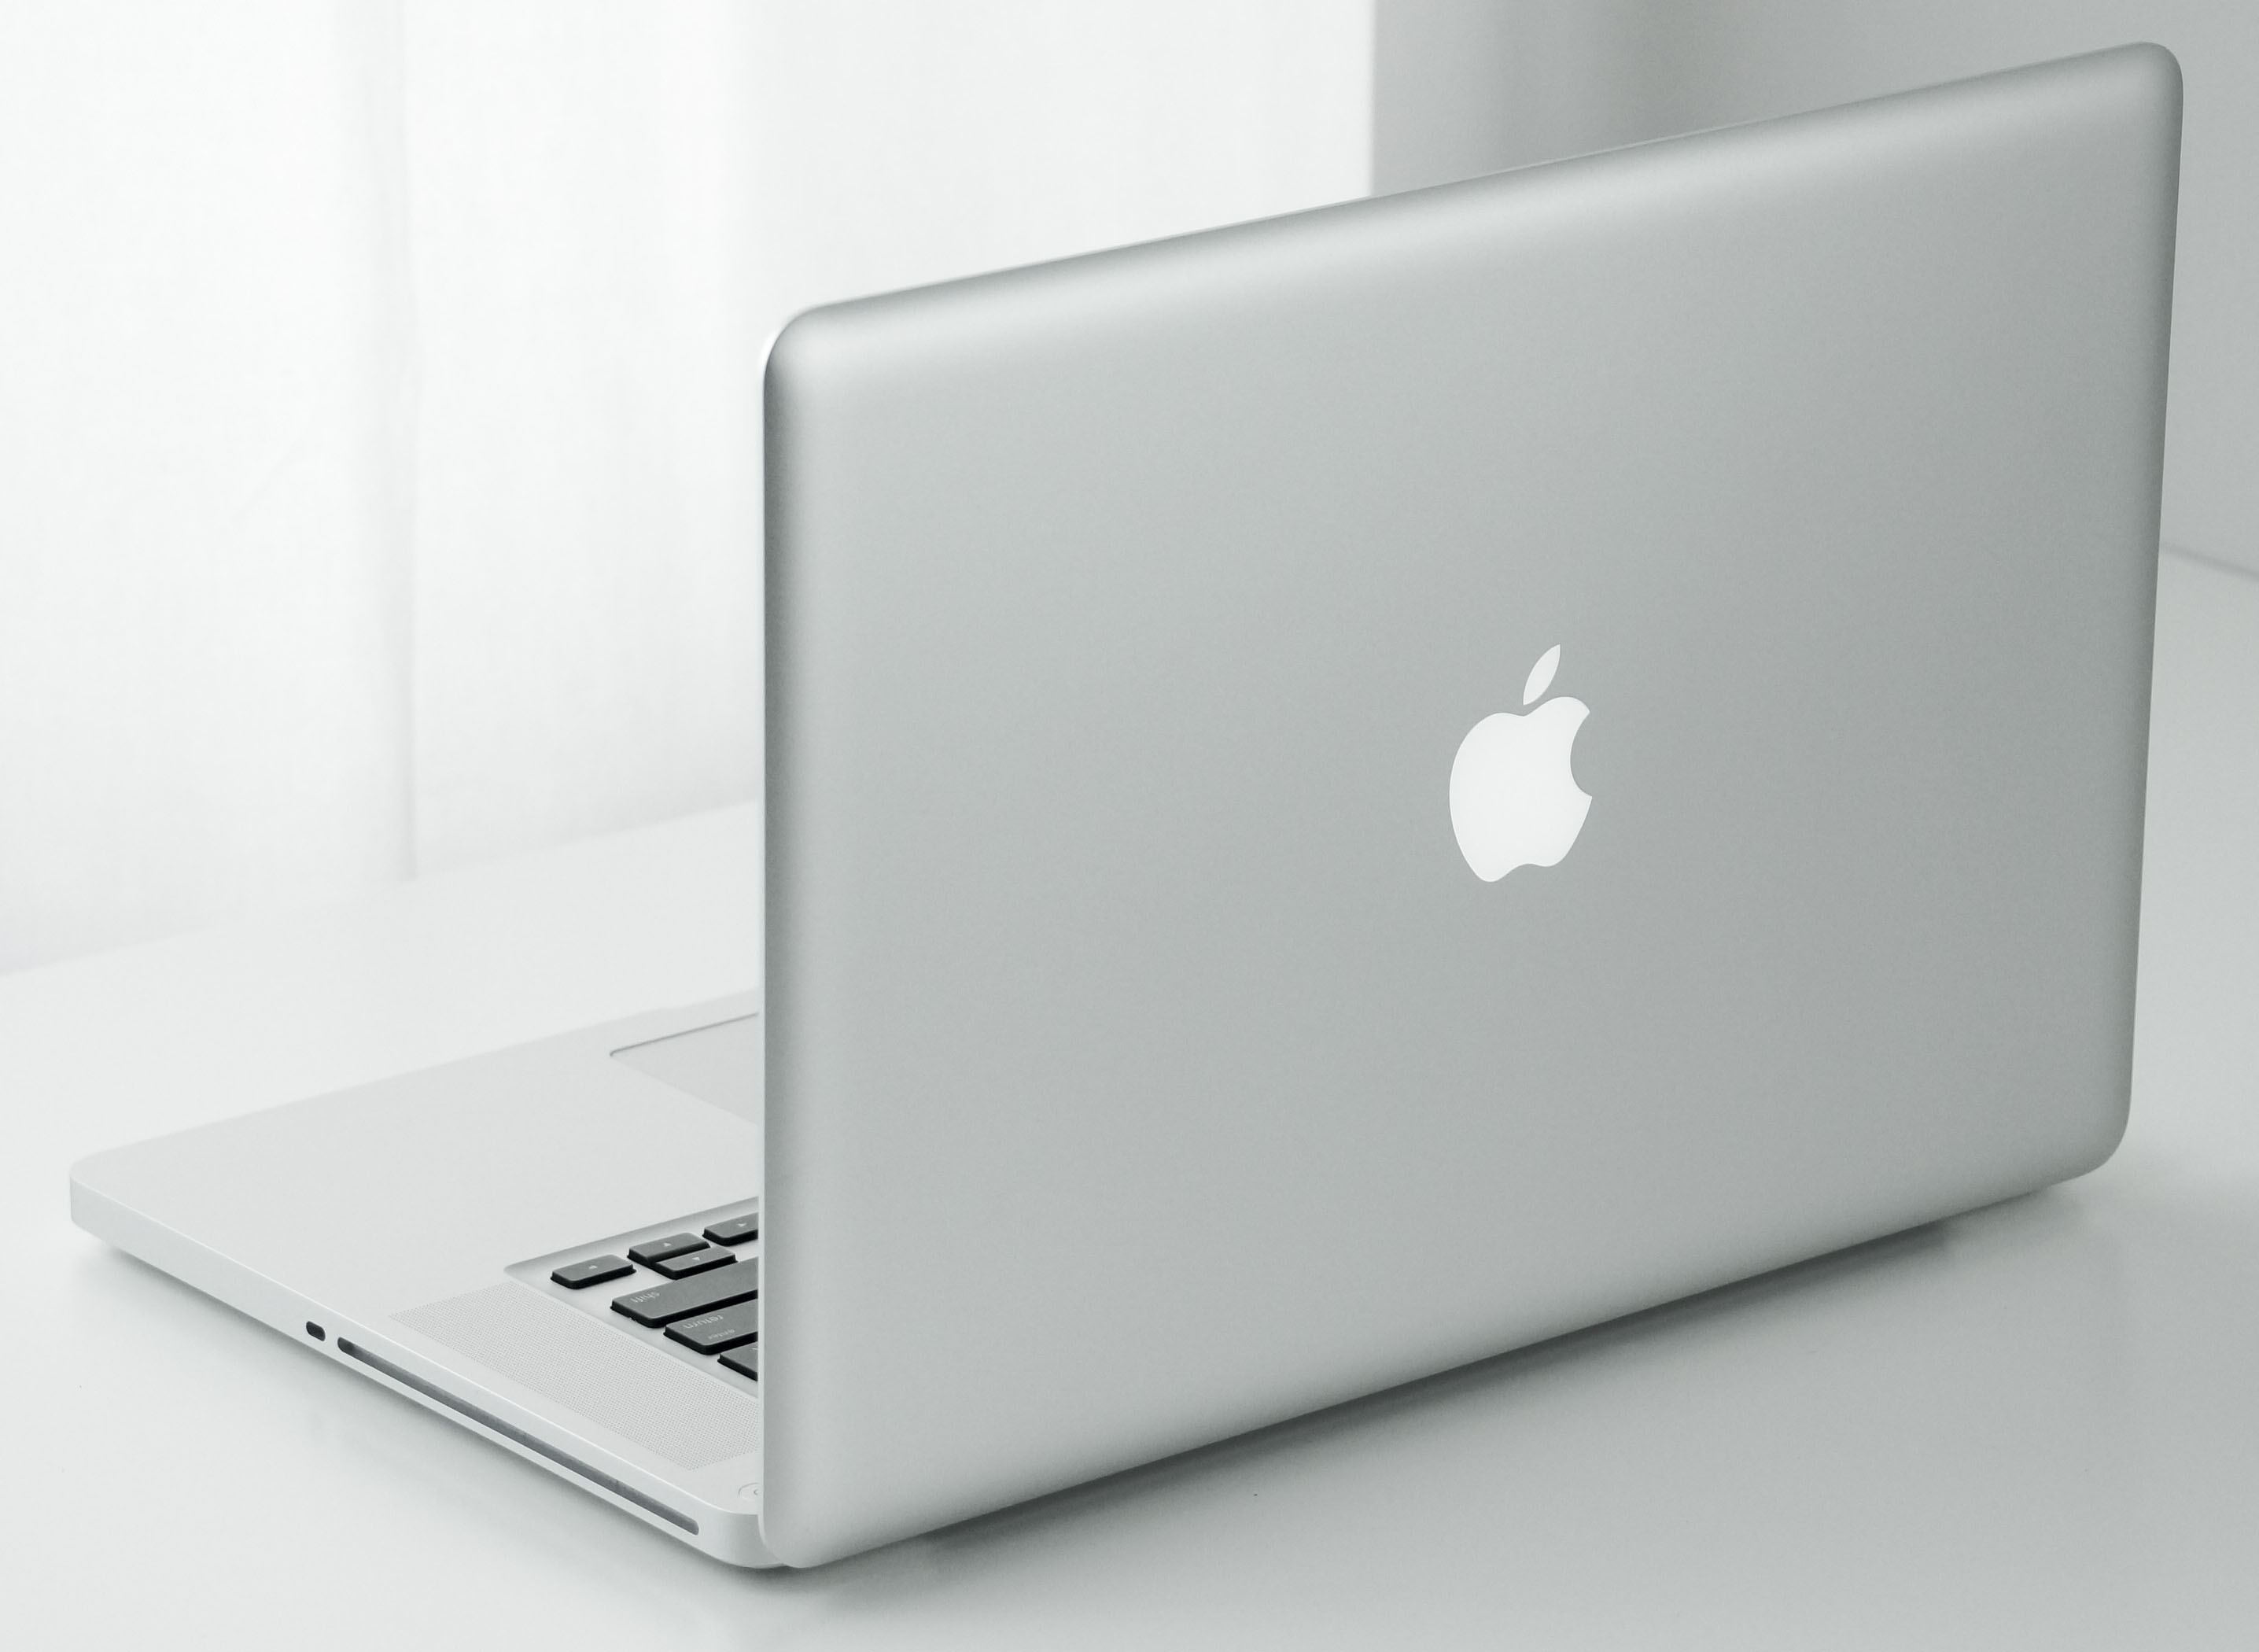 Apple MacBook Pro 15 (Late 2011) - Specs, Tests, and Prices ...